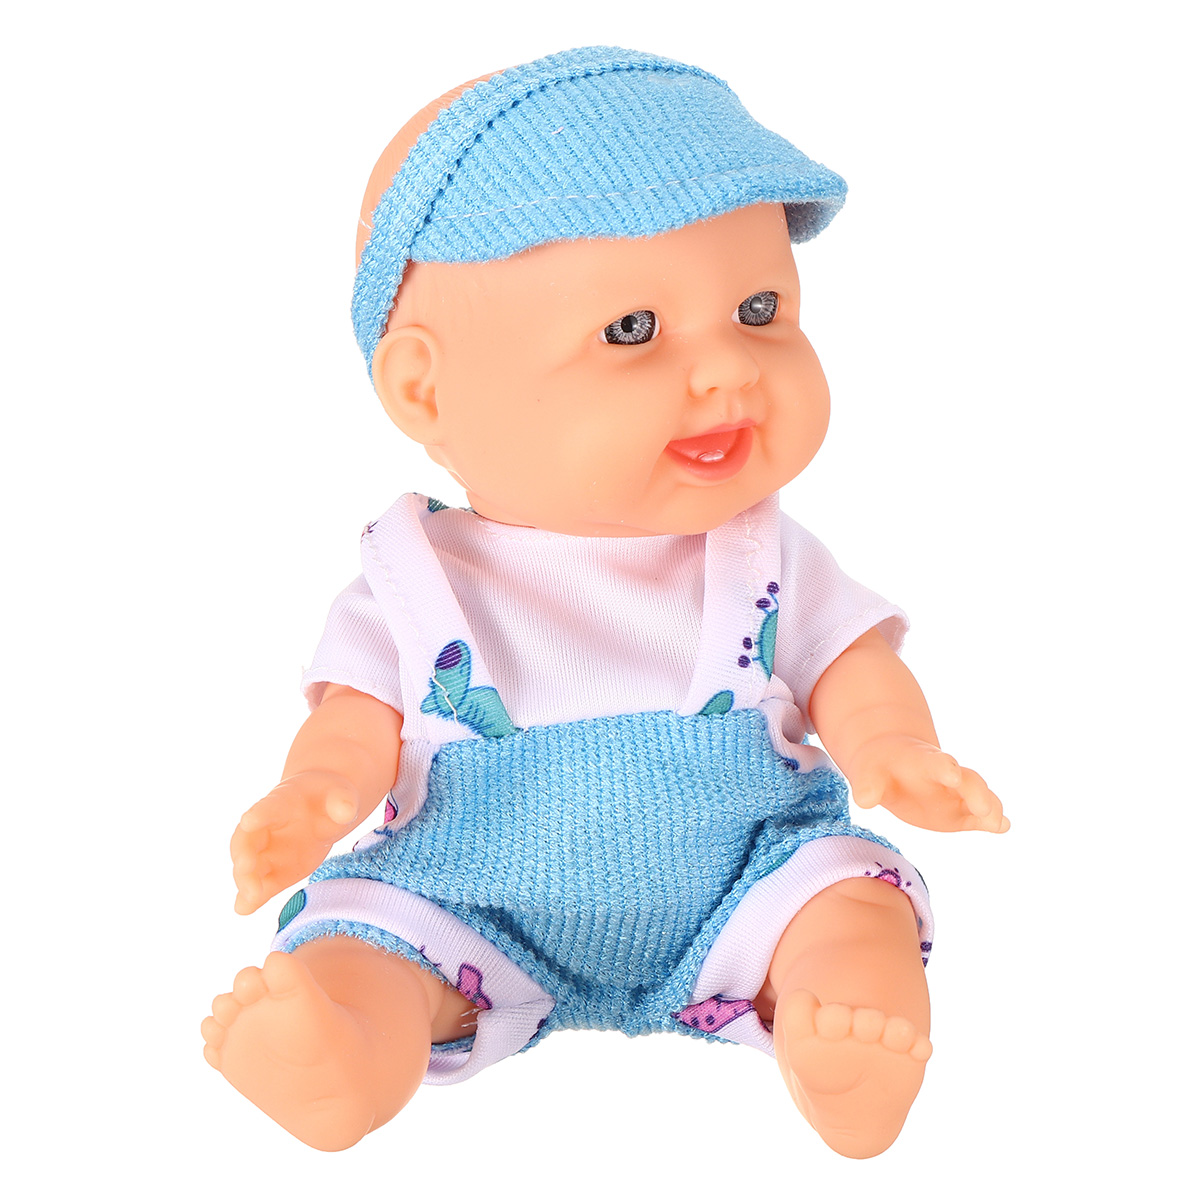 Simulation-Baby-3D-Creative-Cute-Doll-Play-House-Toy-Doll-Vinyl-Doll-Gift-1818655-9